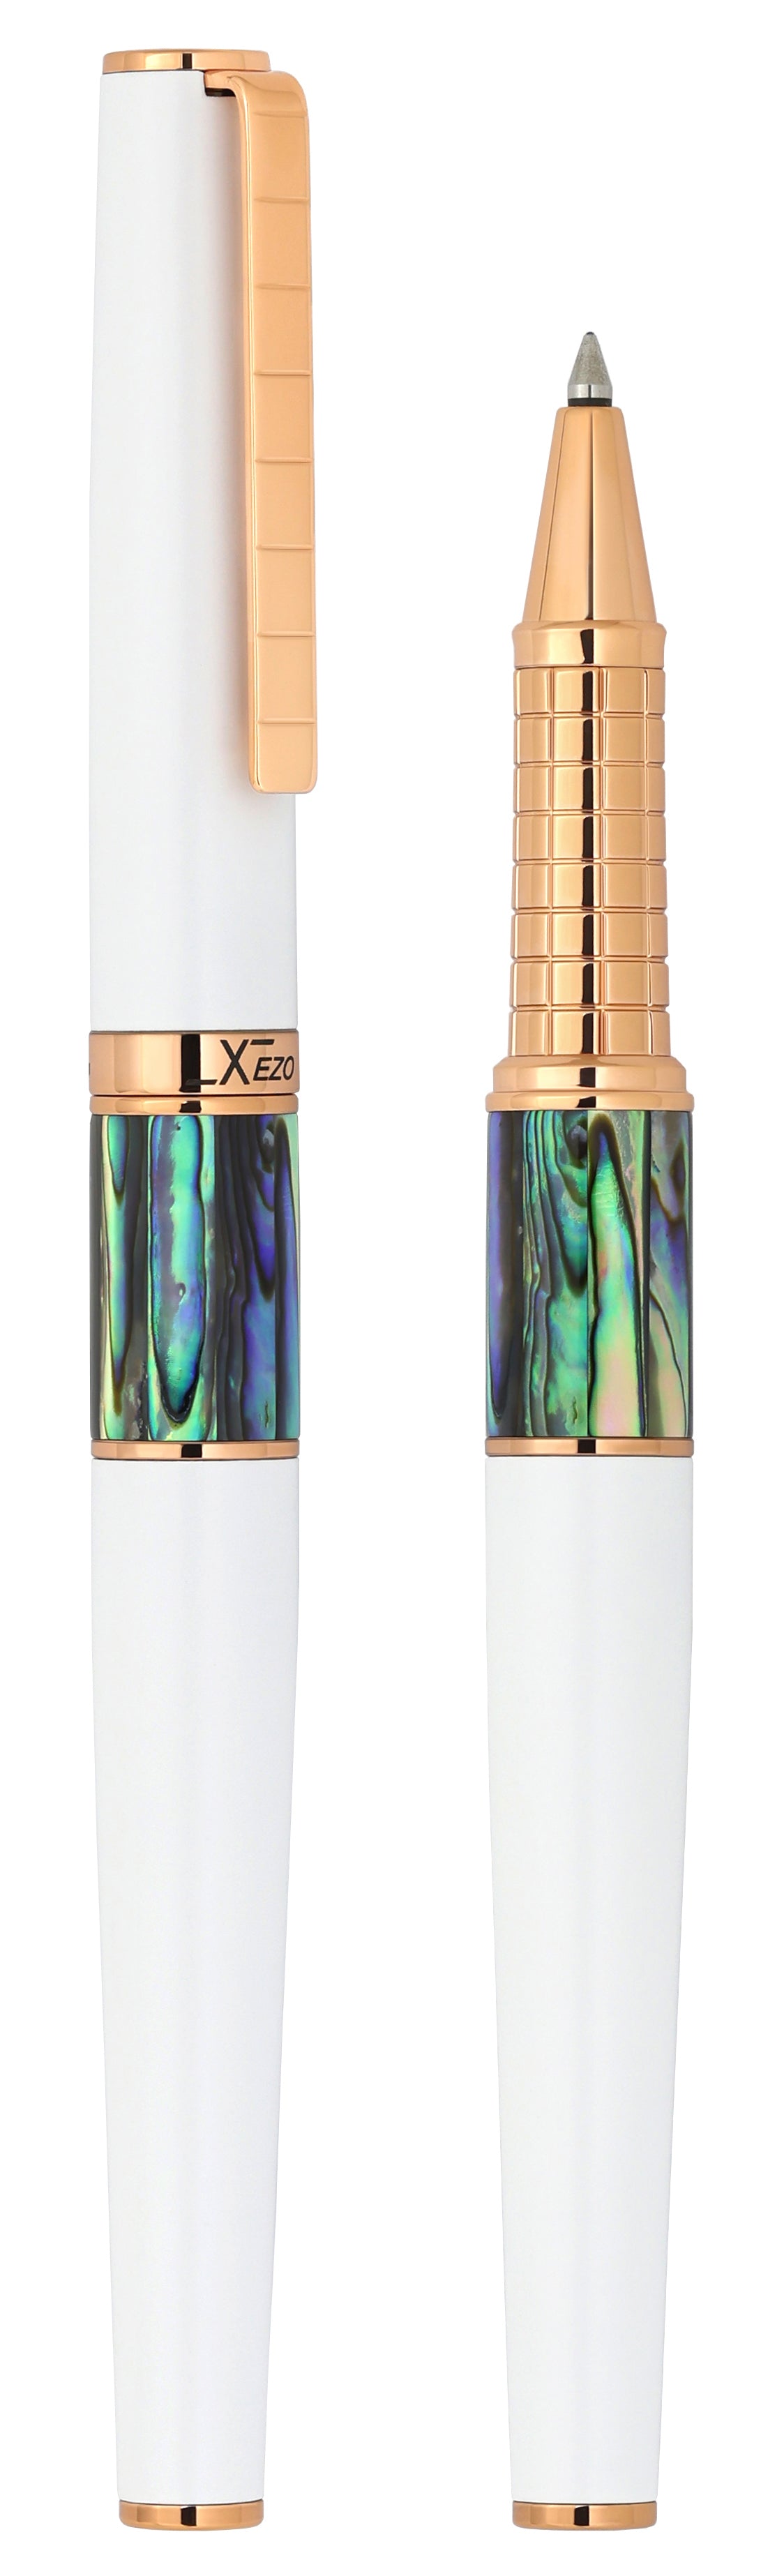 Xezo - Vertical view of two Speed Master White R-ARG Rollerball pens; the one on the left is capped, and the one on the right is uncapped